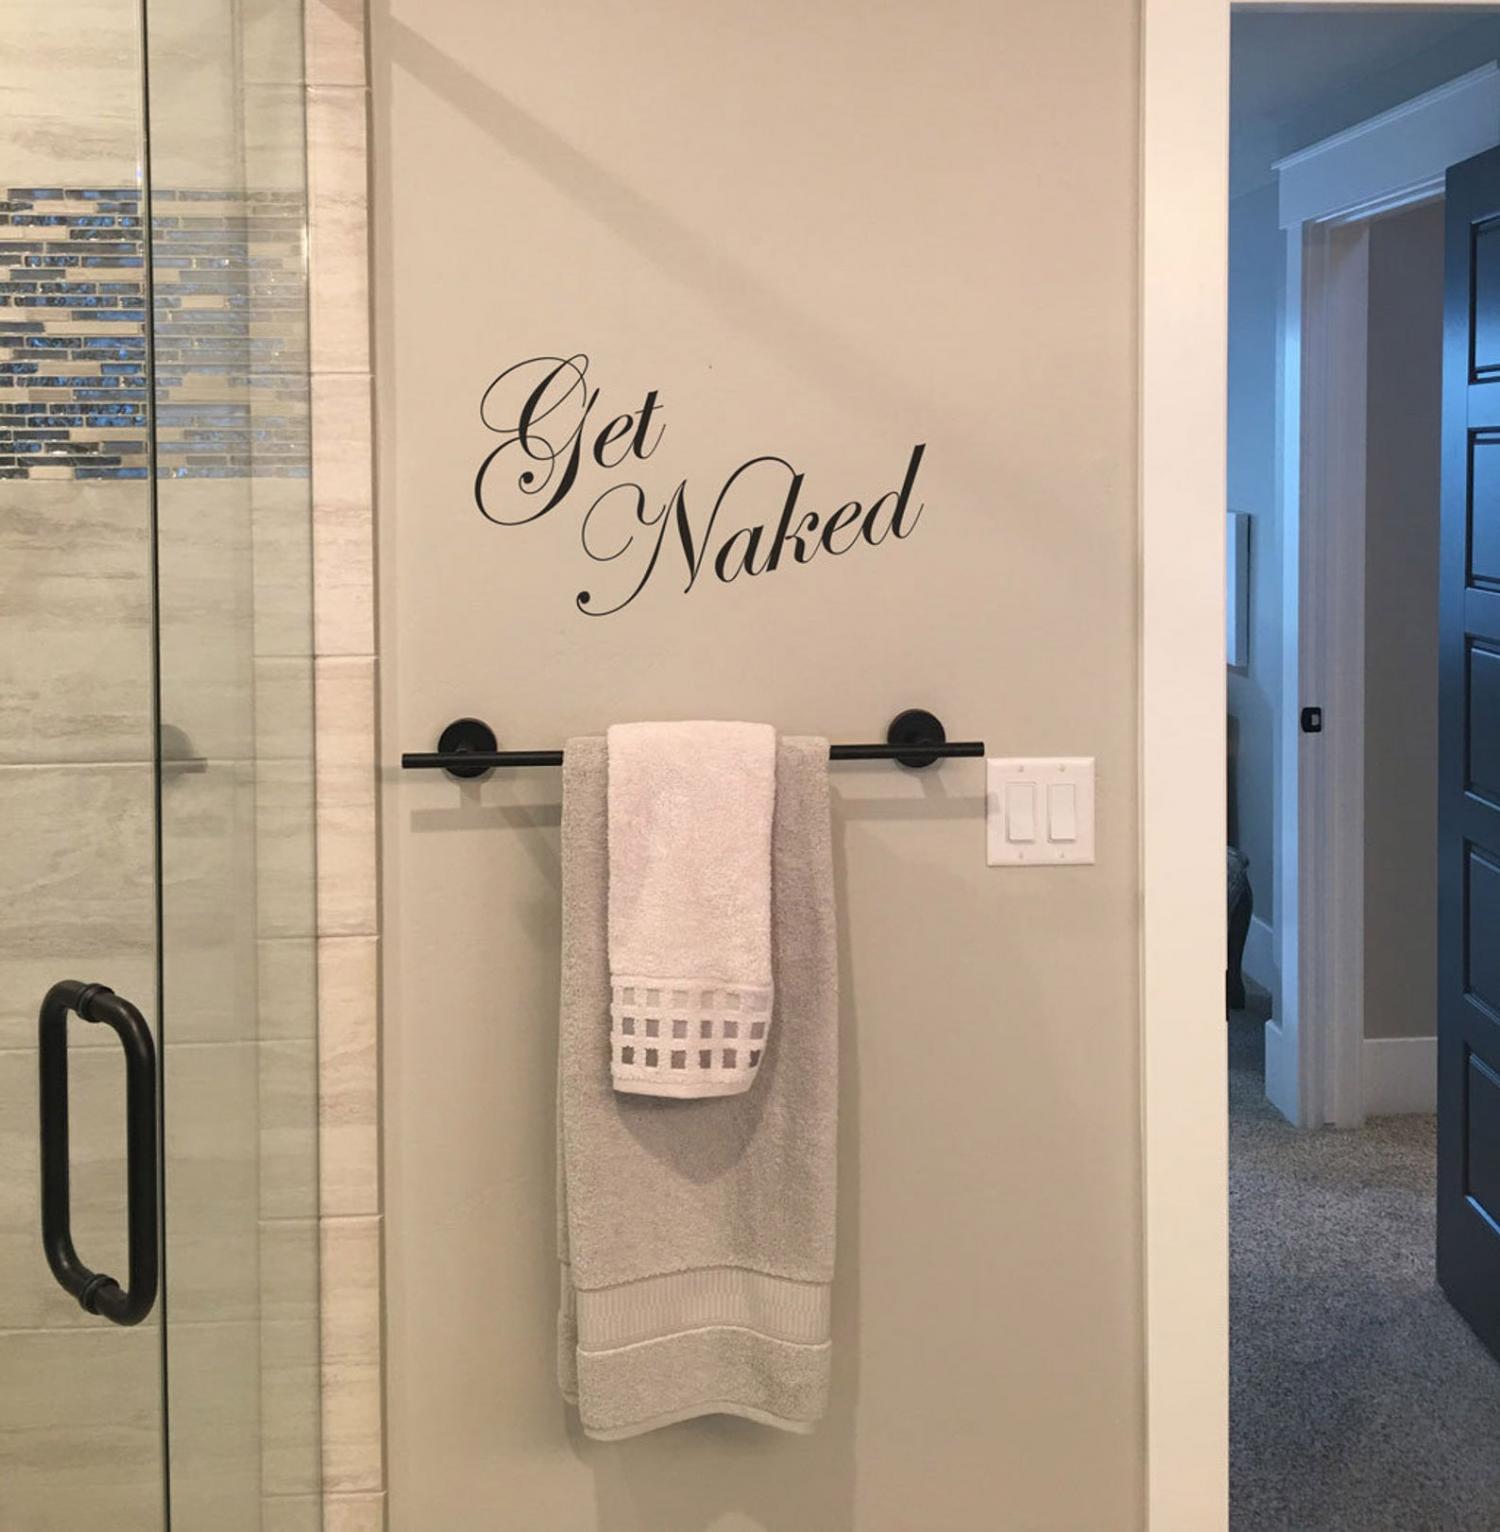 Get Naked Shower Wall Decal